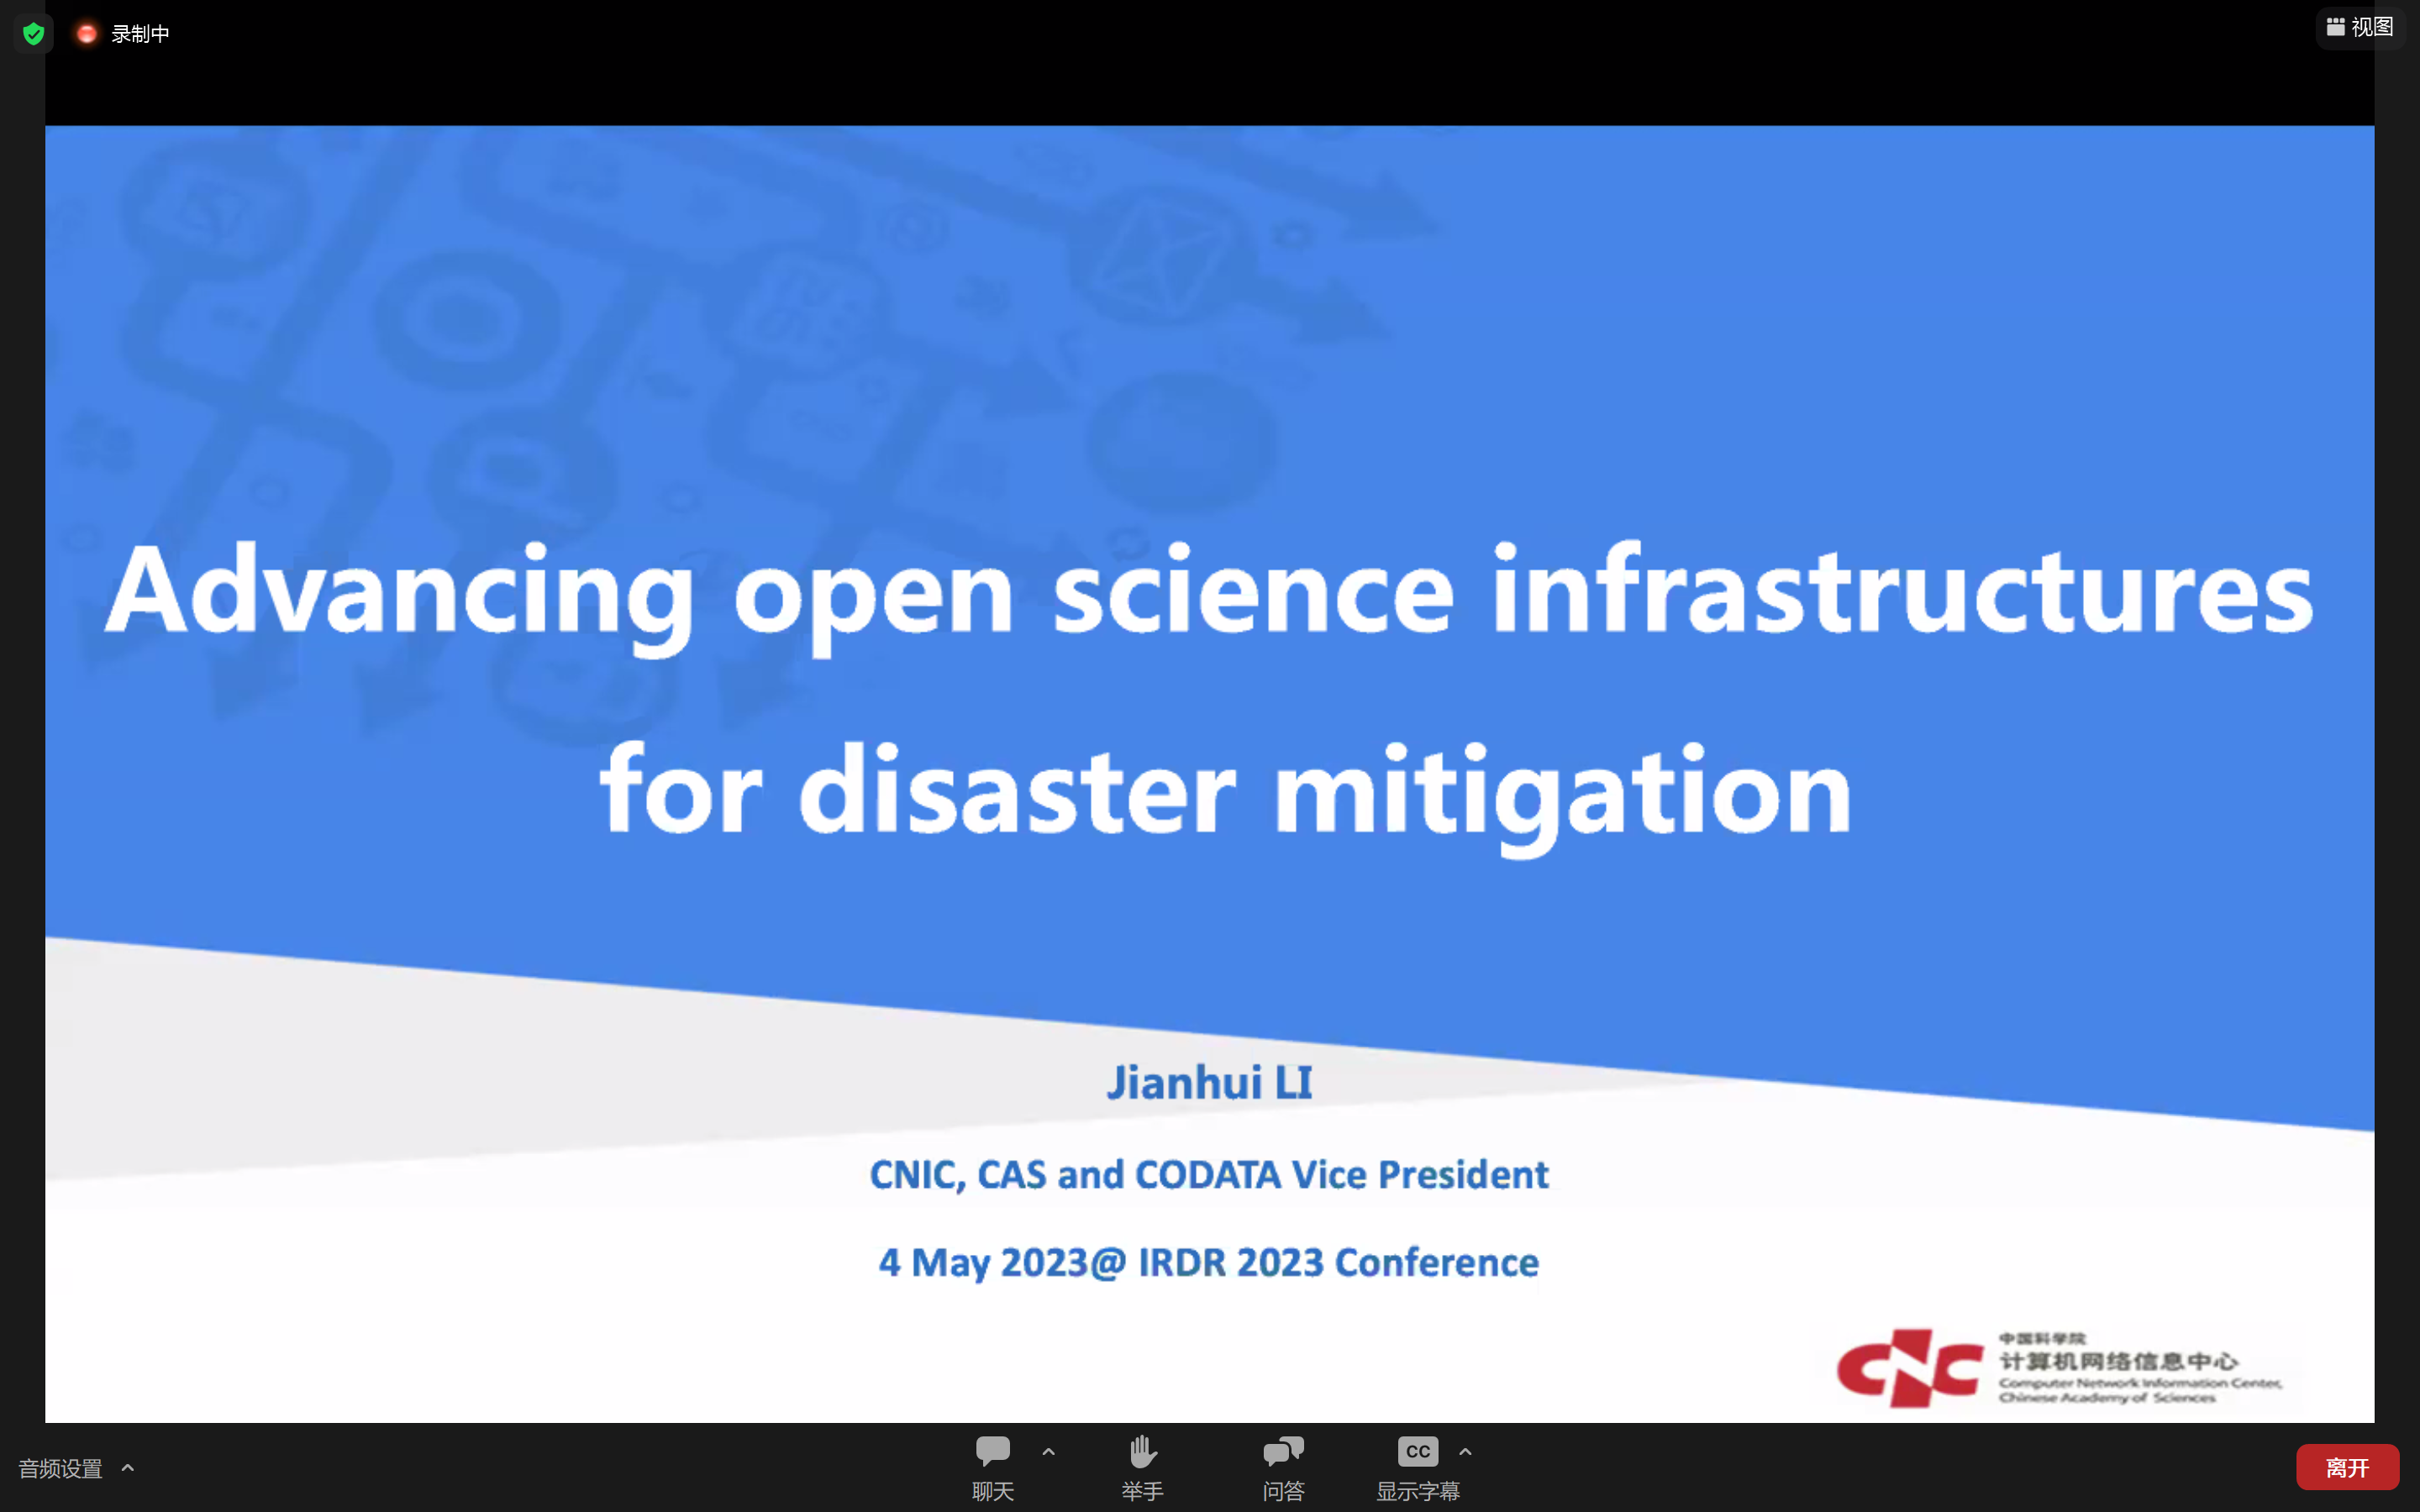 GOSC Representative Talks About Open Science Infrastructures In Support Of Disaster Mitigation